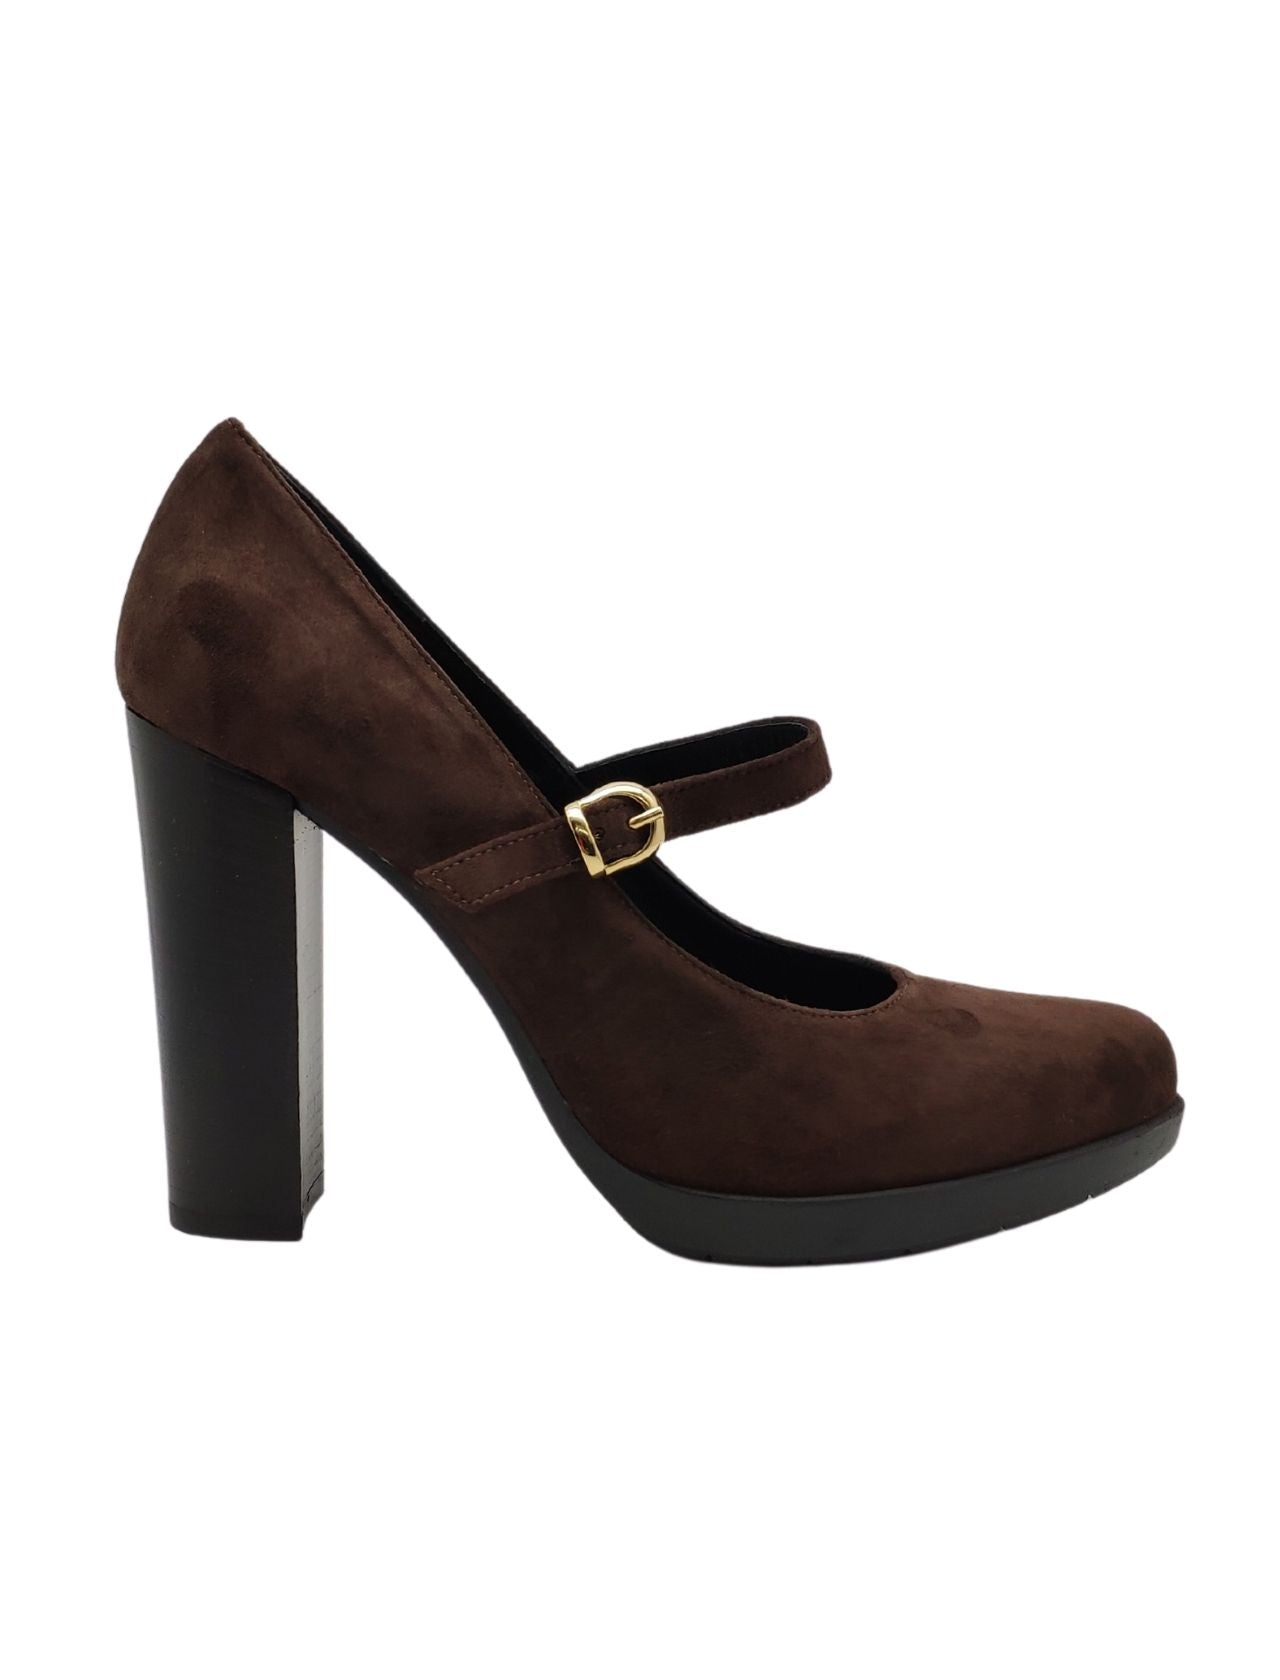 Women's Shoes Women's Pumps In Dark Brown Suede With Matching Strap